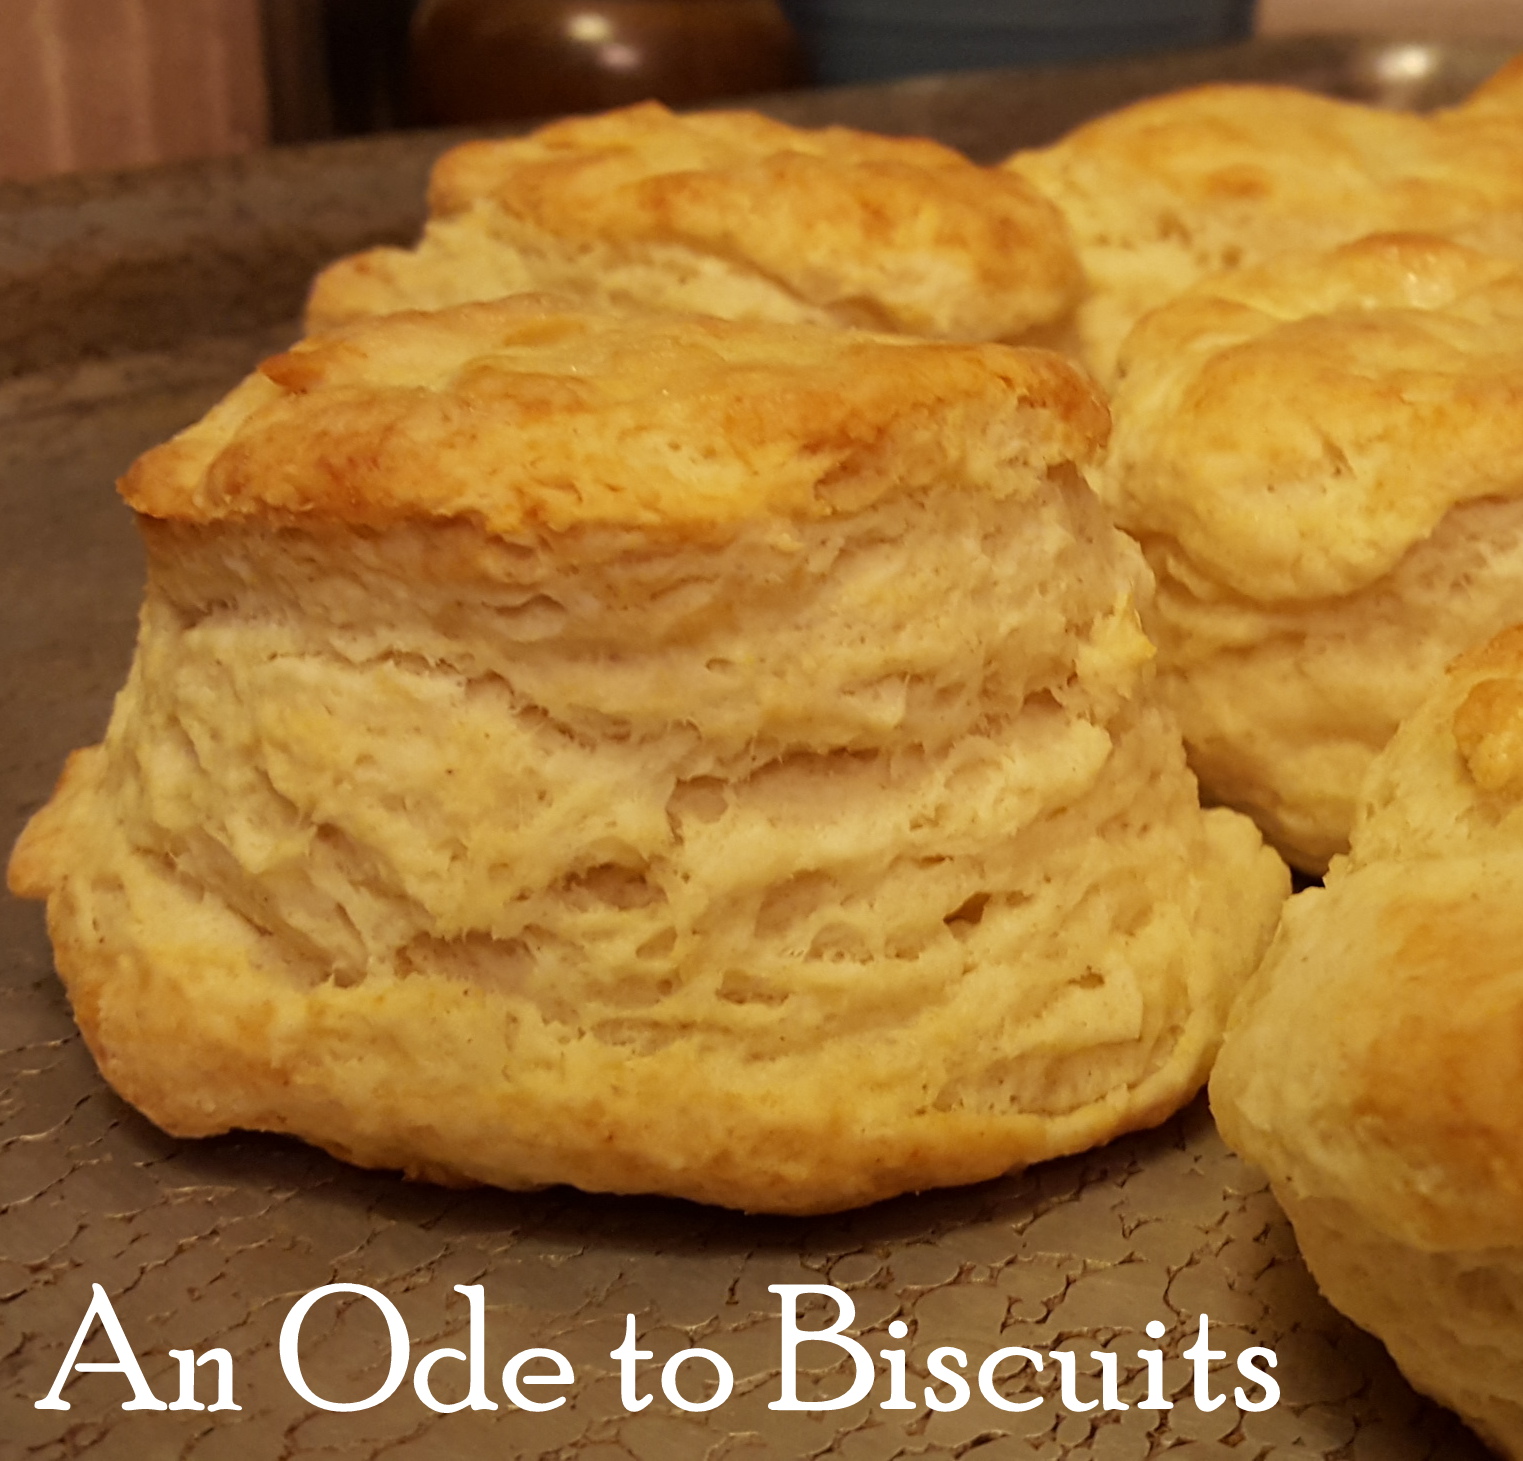 i8tonite: An Ode To Biscuits (with recipe!)